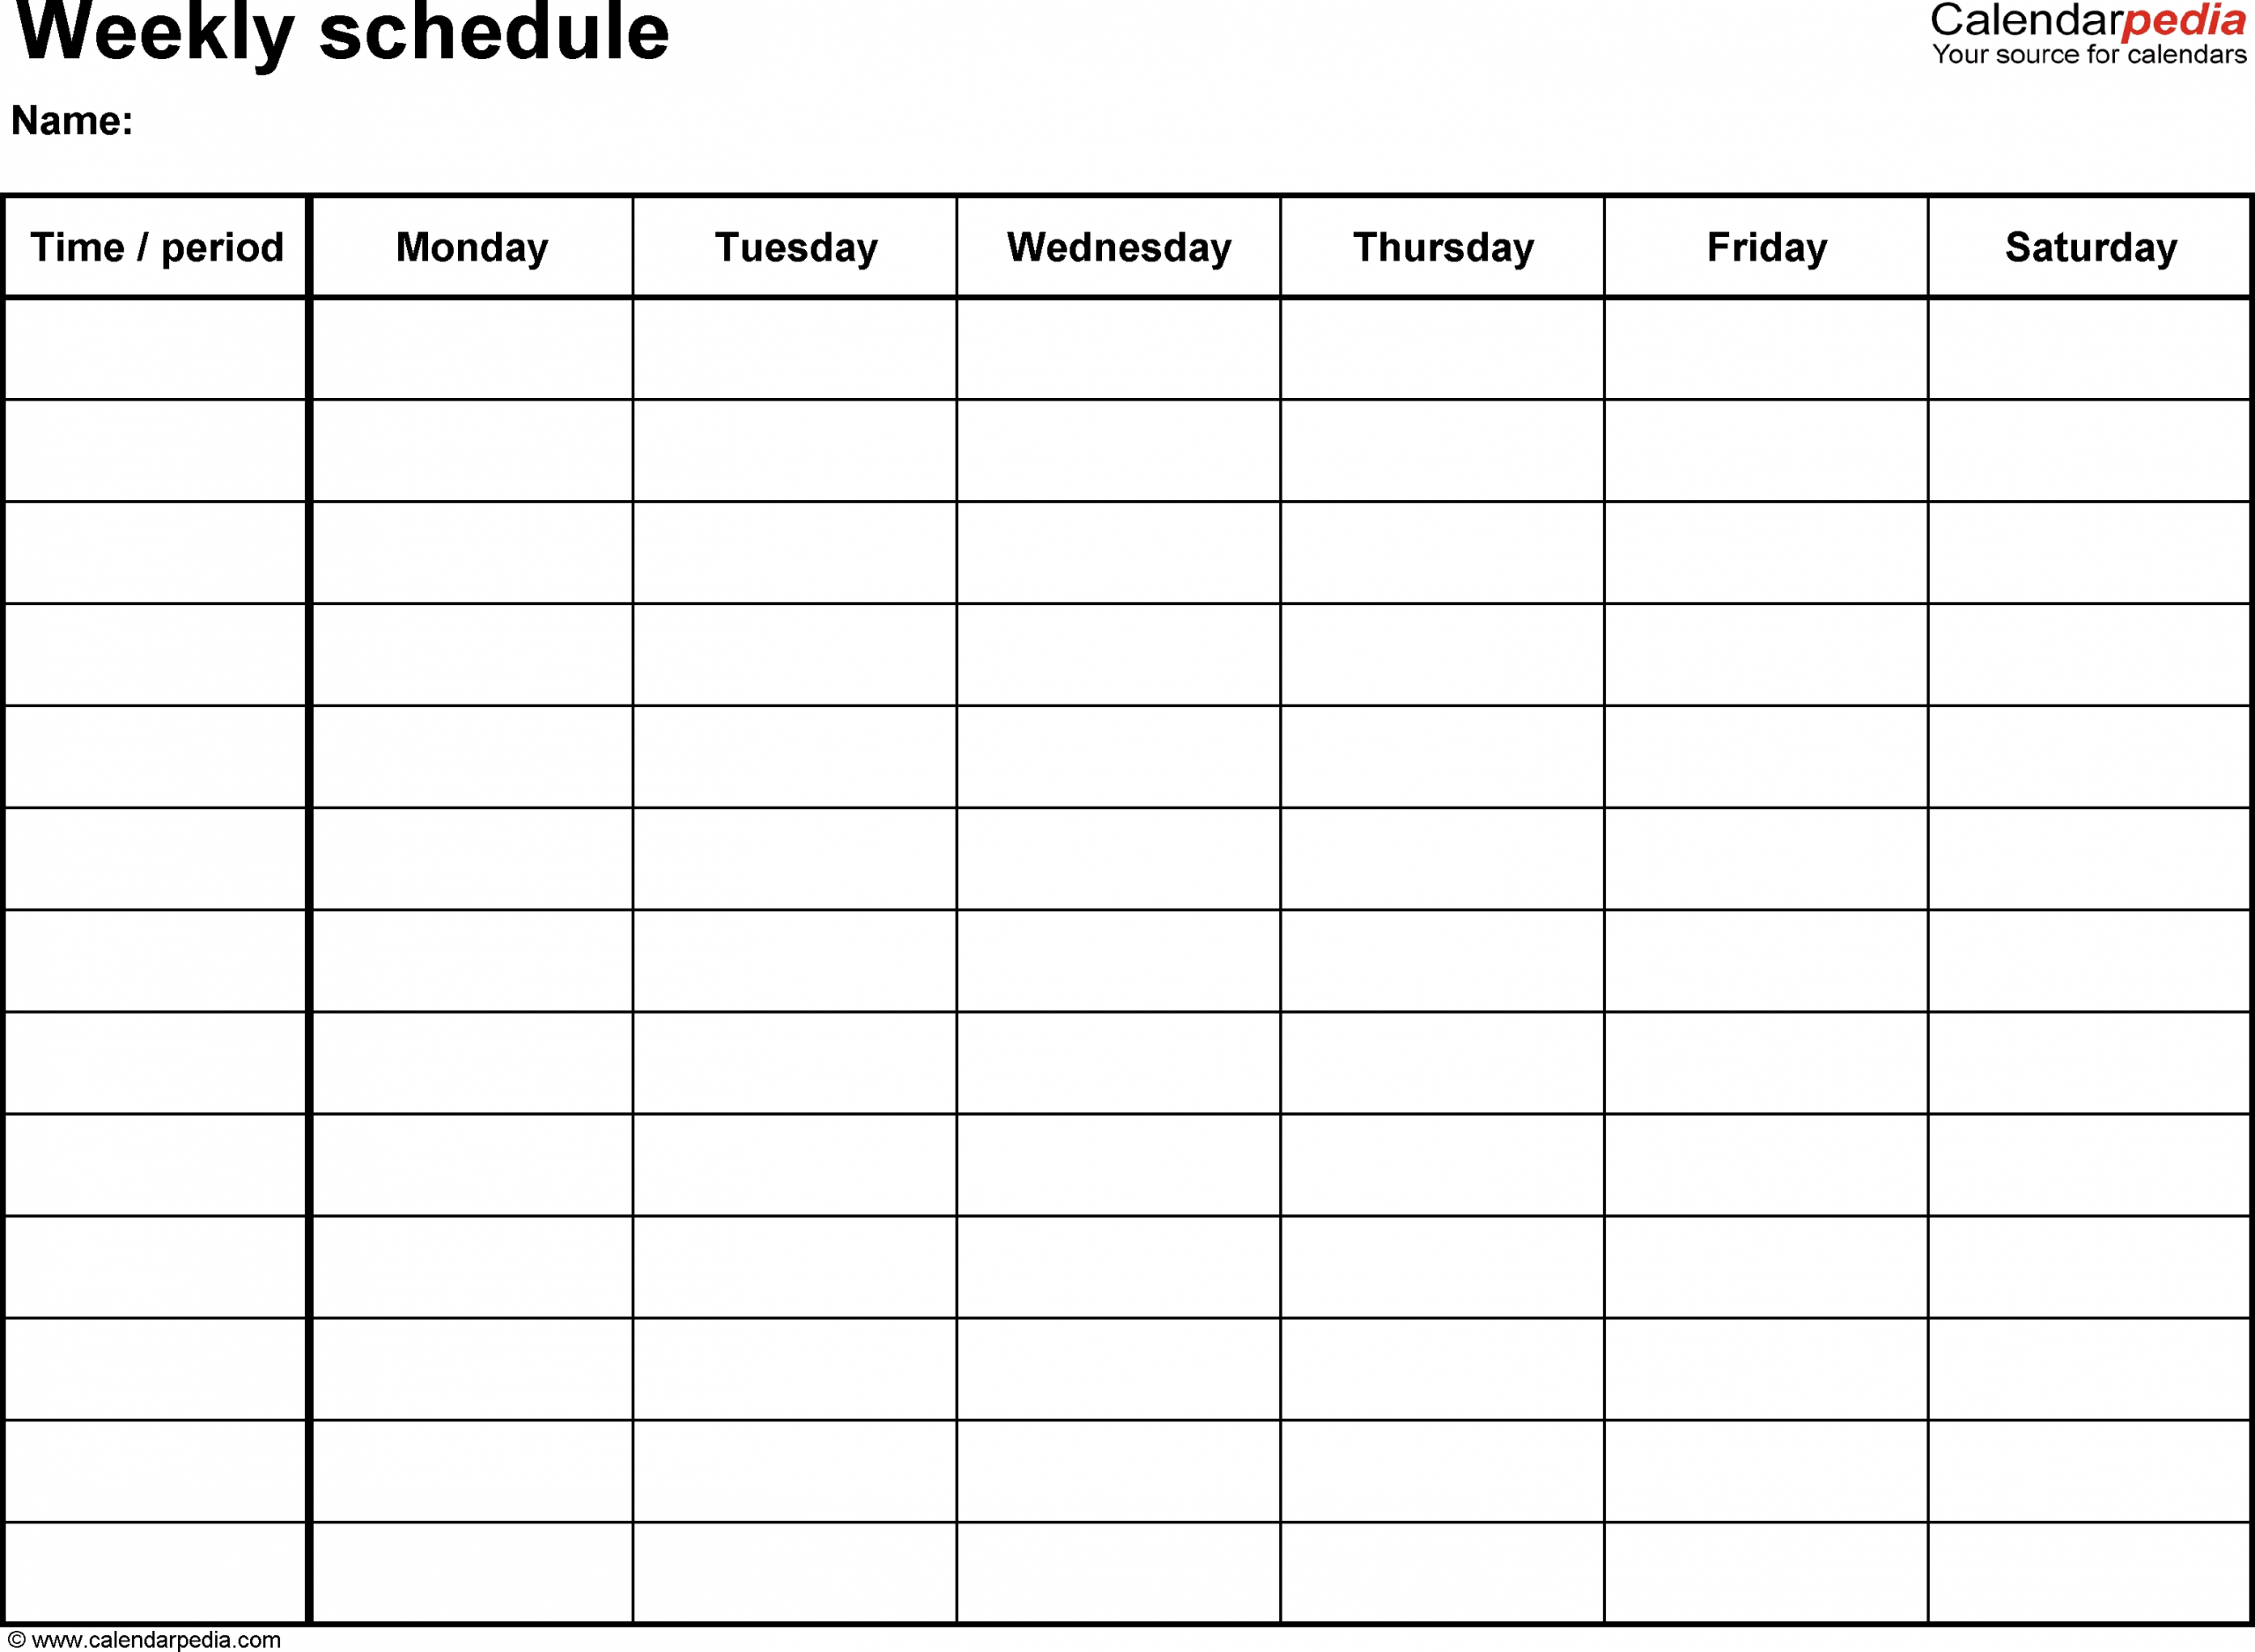 Free Weekly Schedule Templates For Excel - 18 Templates regarding Emplyee Schedule Template Starting Friday